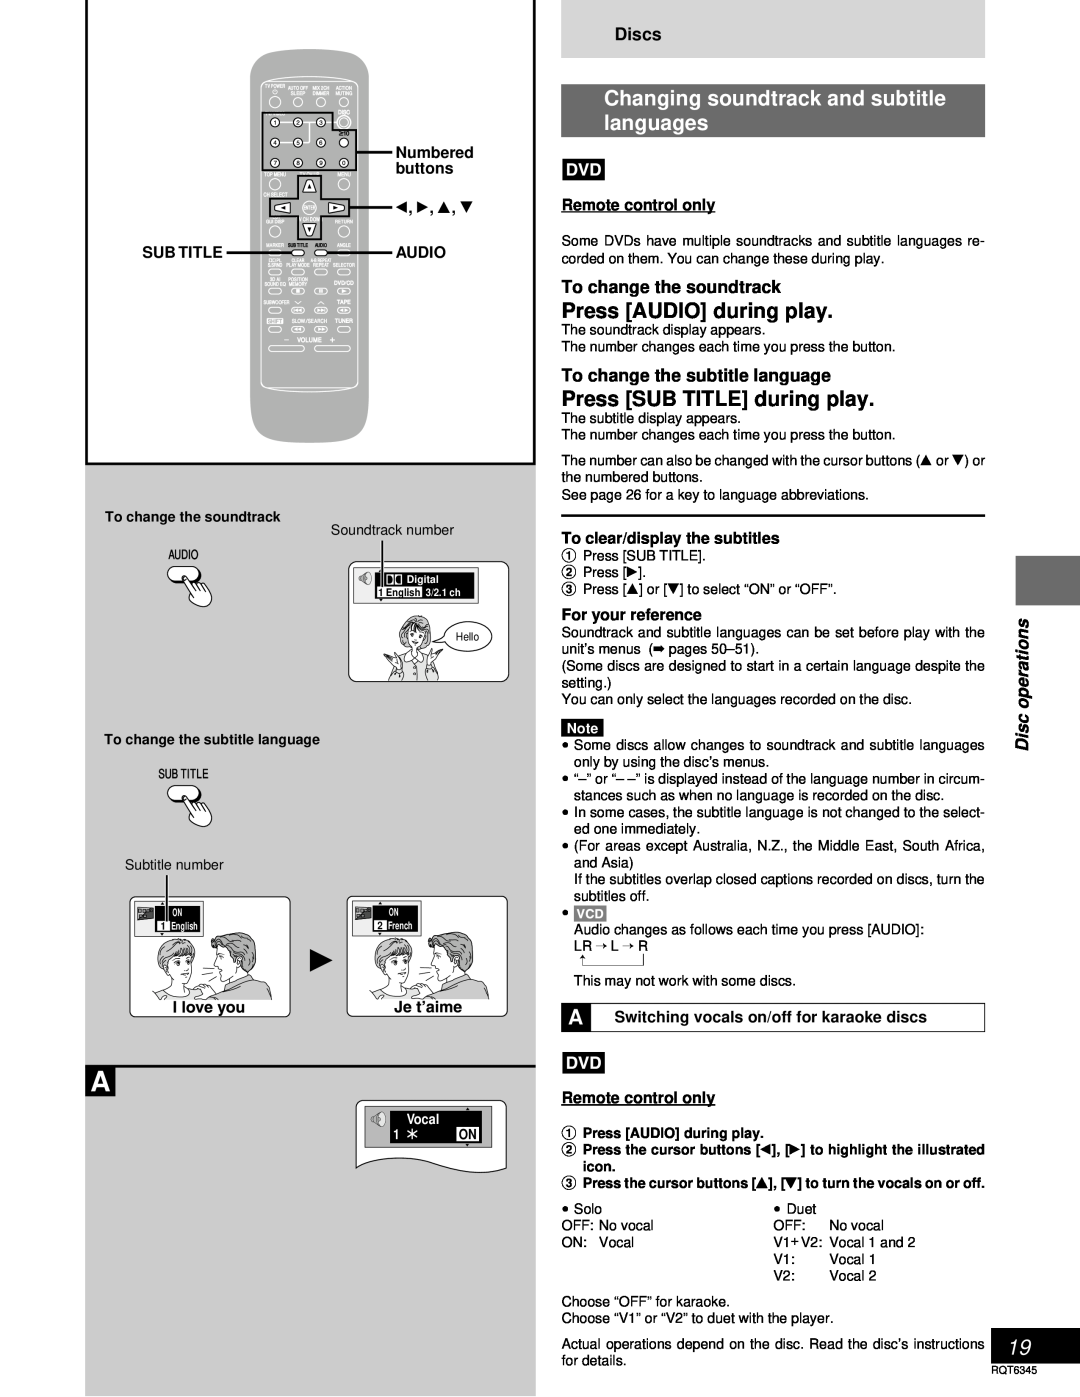 Panasonic SC-DK20 Changing soundtrack and subtitle languages, Press AUDIO during play, Press SUB TITLE during play, Audio 